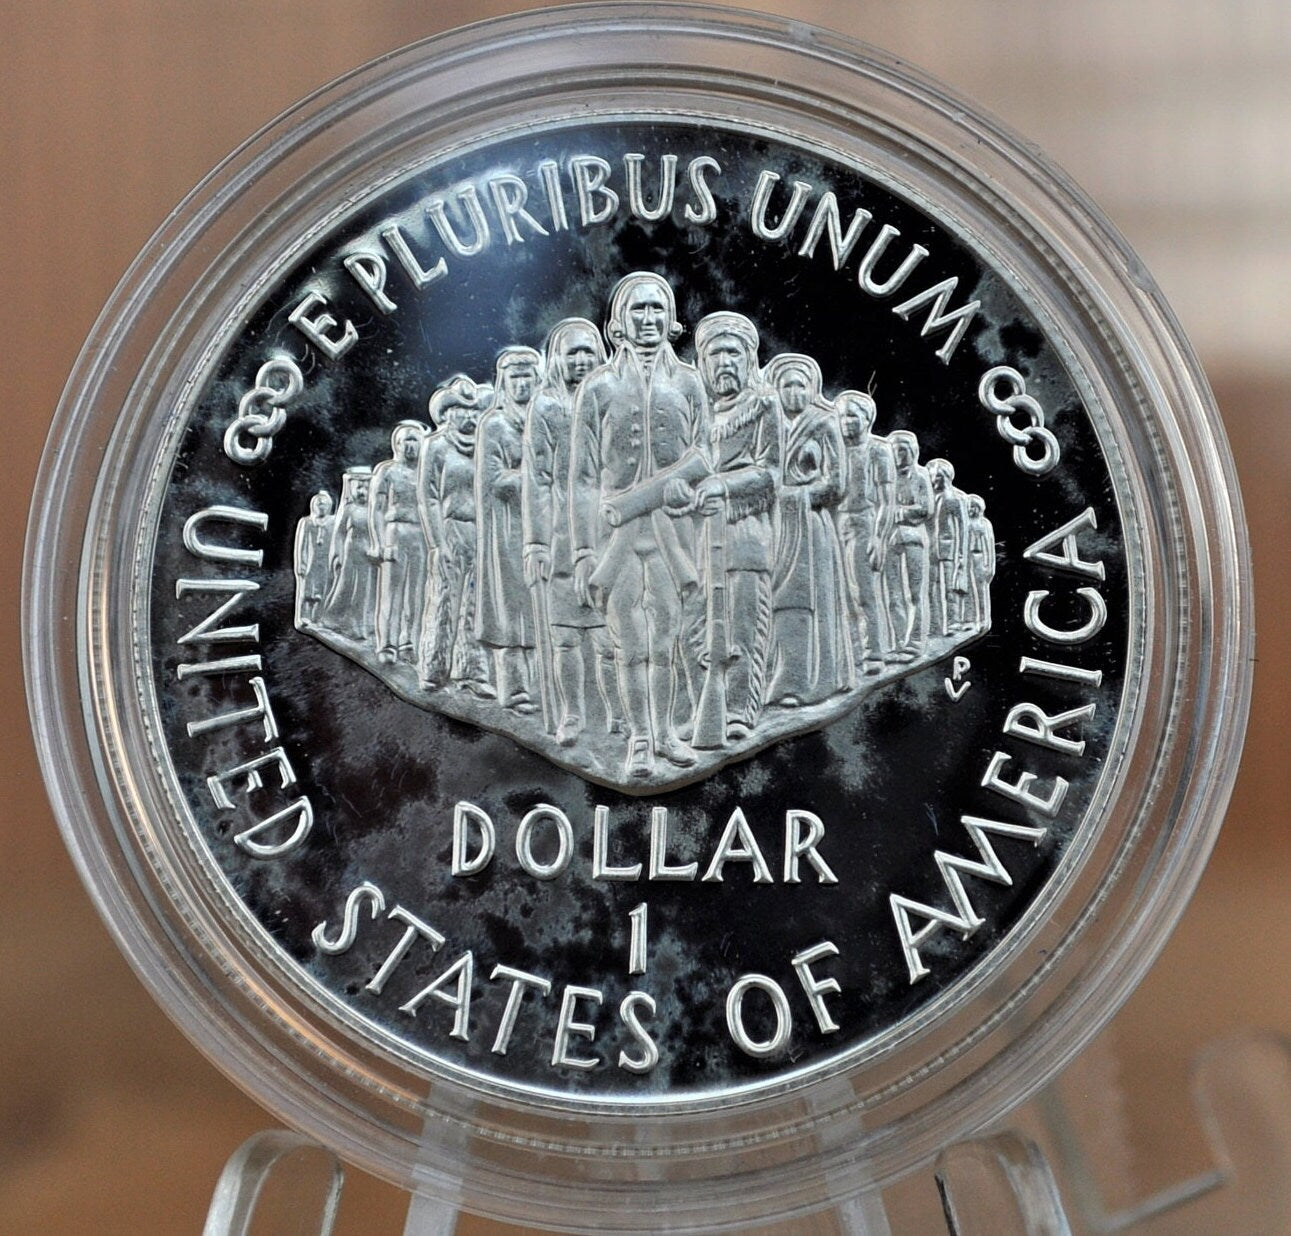 1987 U.S. Constitution Bicentennial Silver Dollar - In Original Mint Case - Proof, Silver - We The People Commemorative Silver Dollar